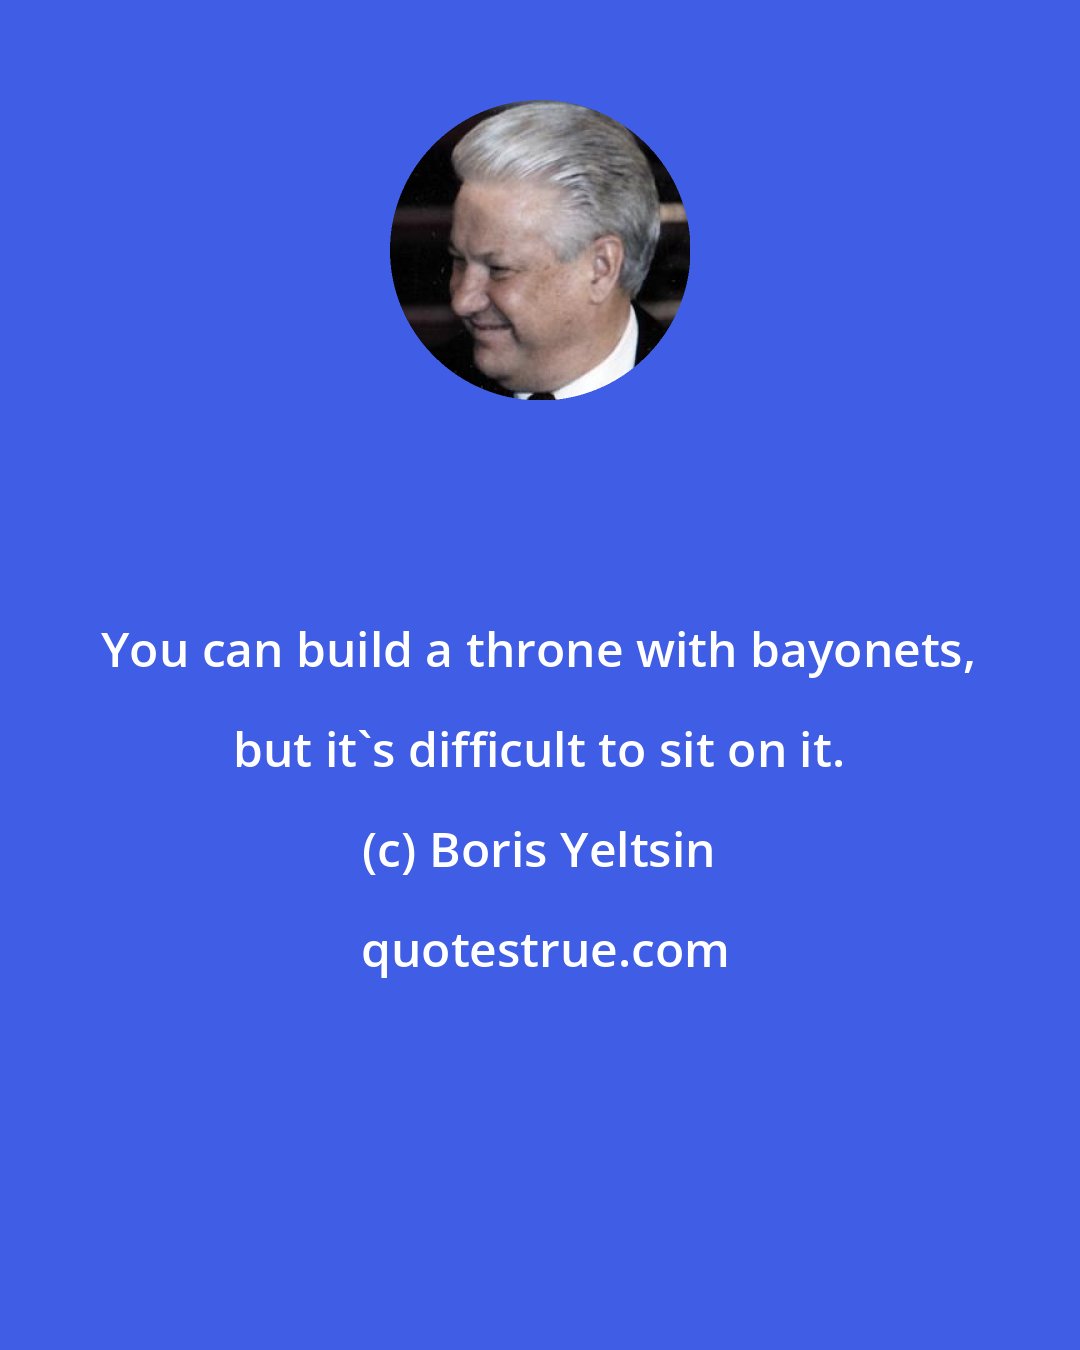 Boris Yeltsin: You can build a throne with bayonets, but it's difficult to sit on it.